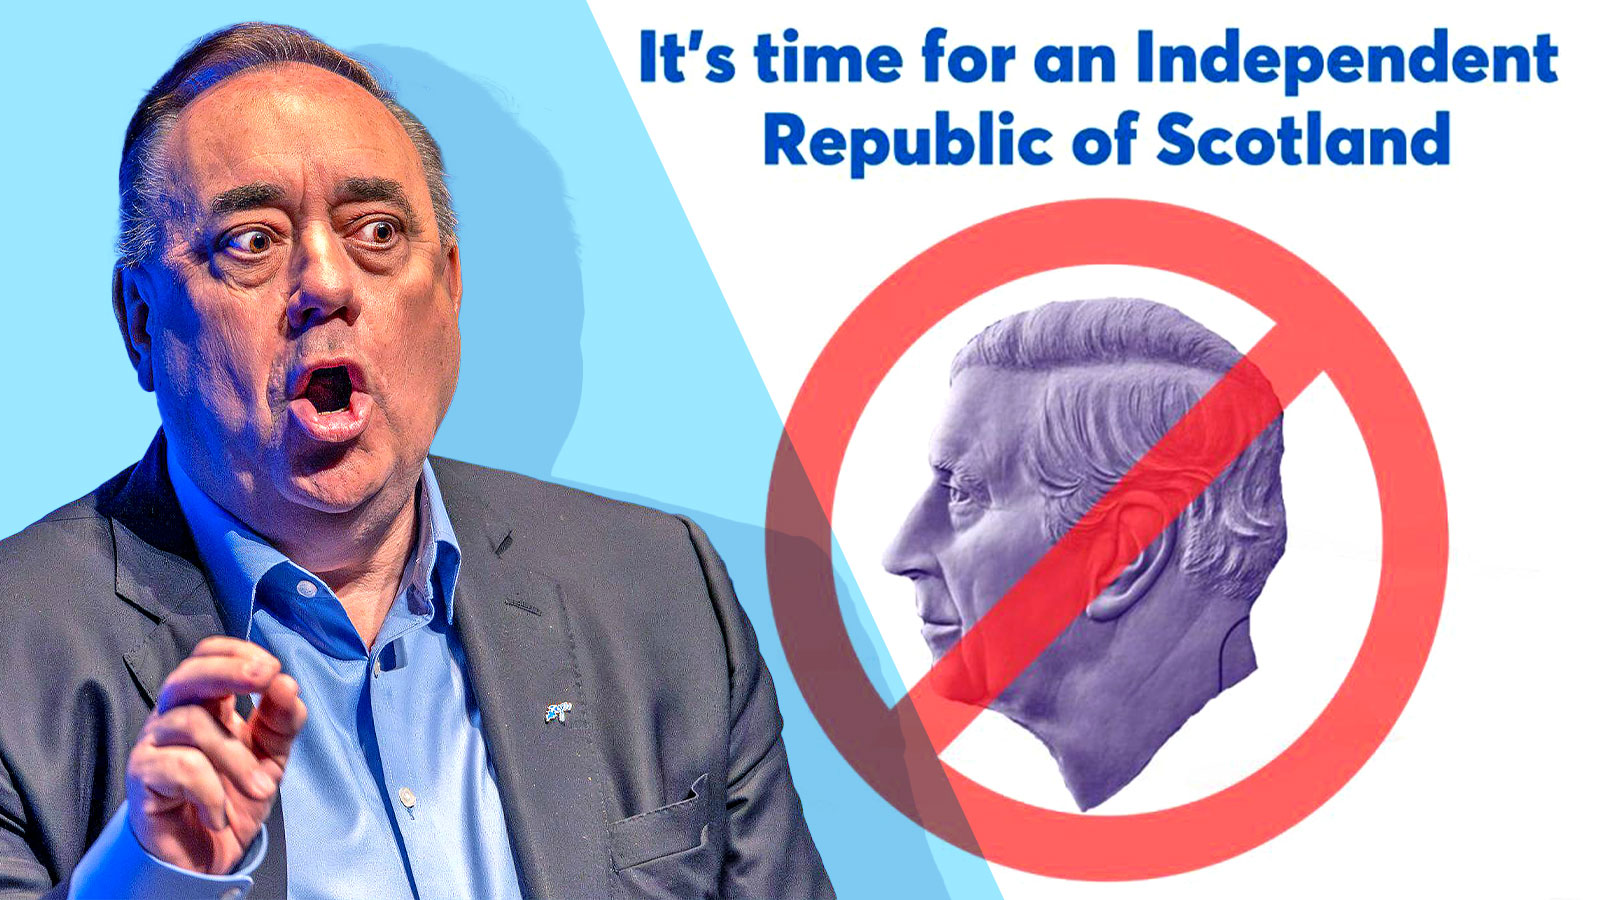 Alex Salmond has switched from being a monarchist to espousing republicanism